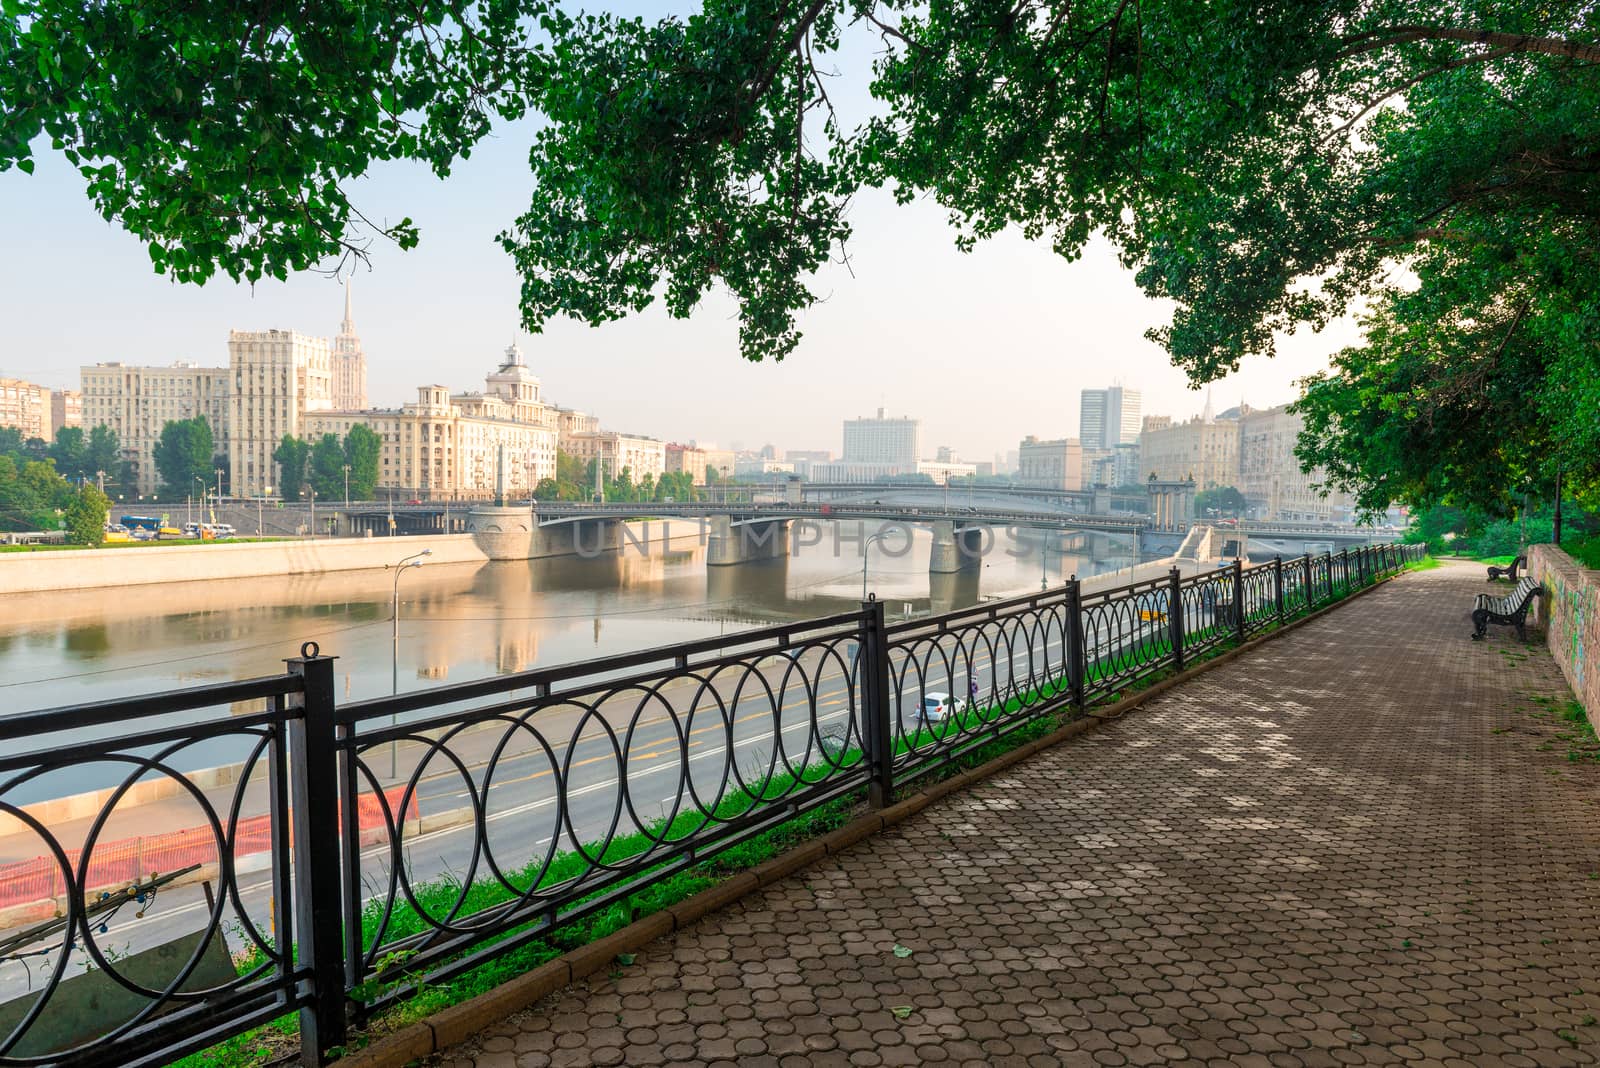 Moscow landscape at dawn, walk along the embankment of the river by kosmsos111